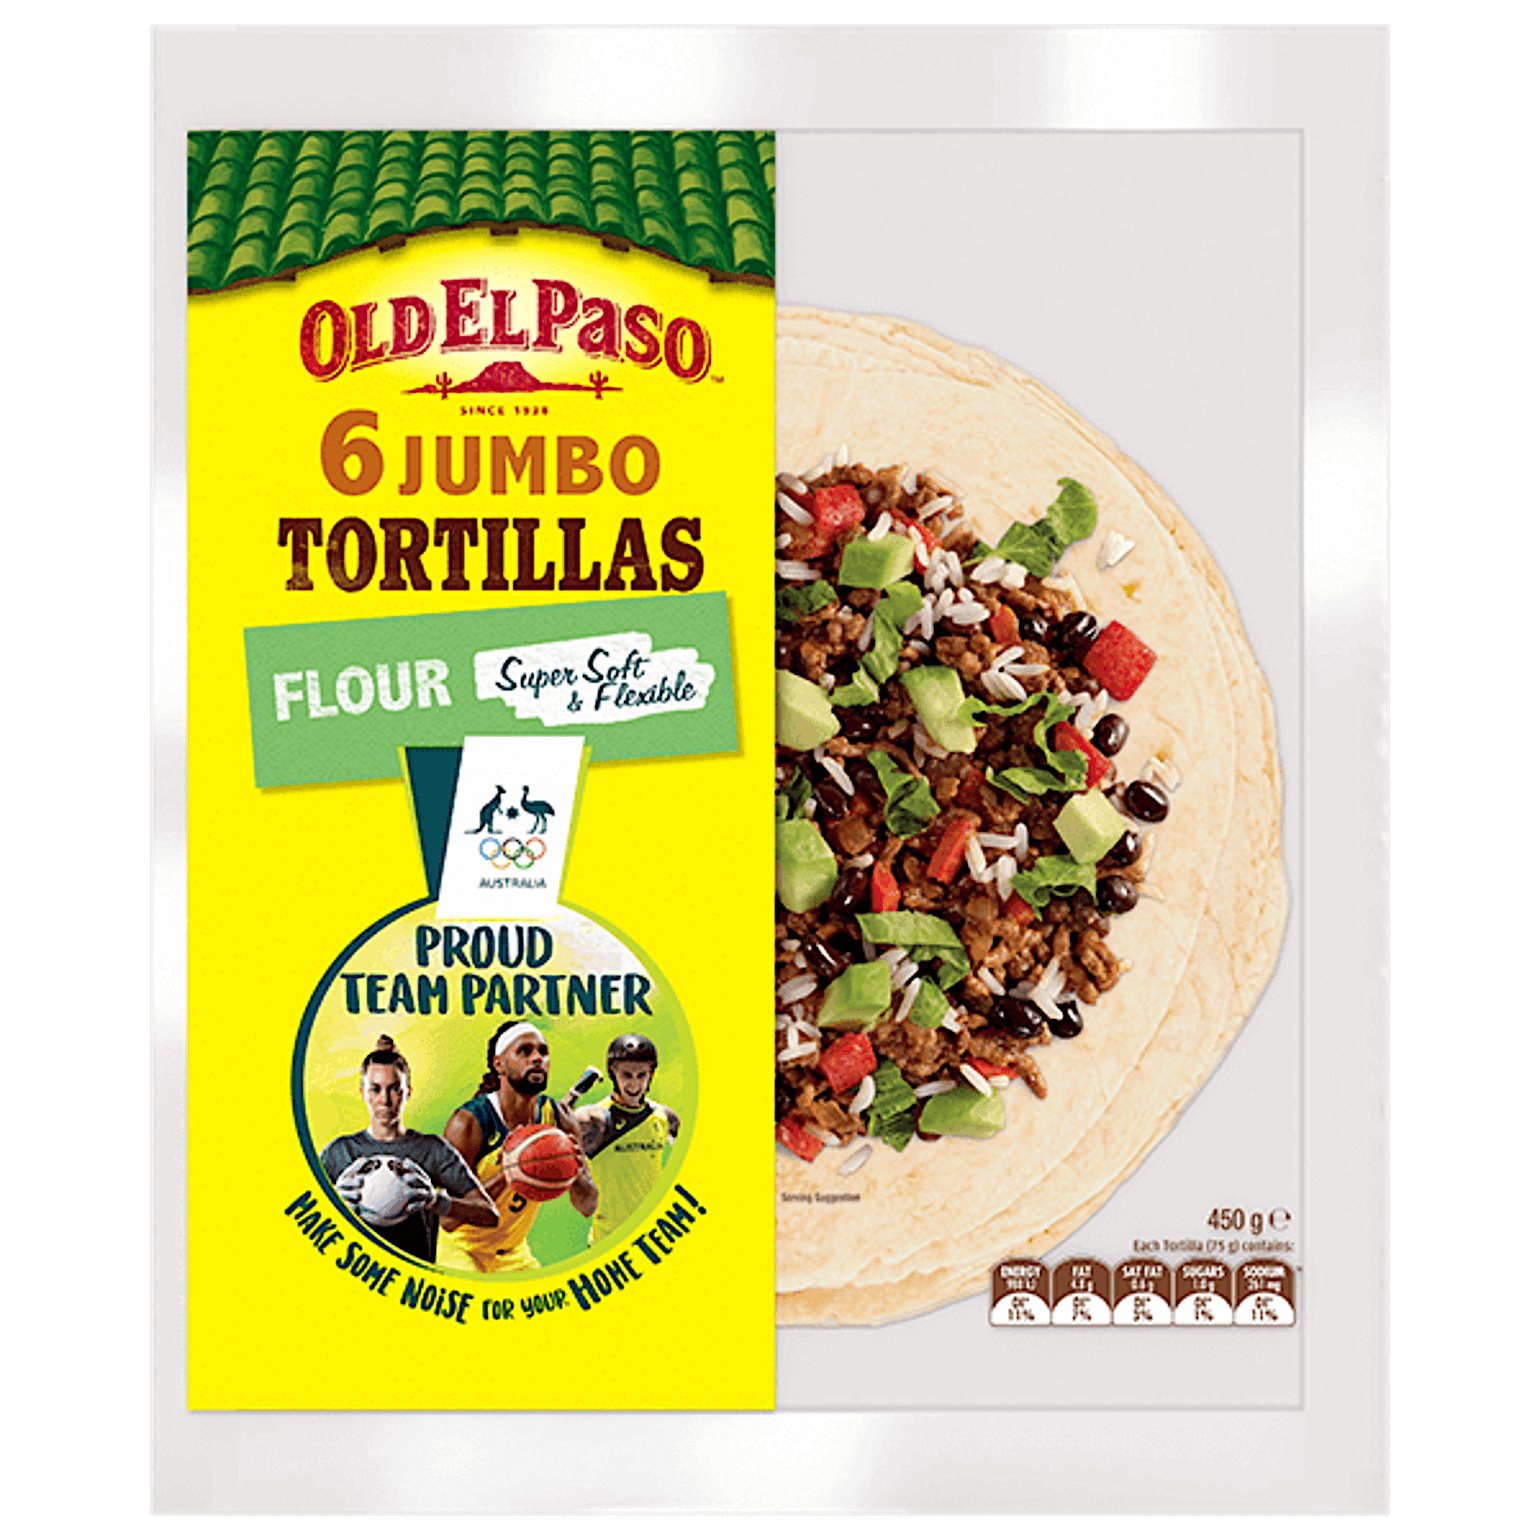 a pack of Old El Paso's 6 jumbo flour tortillas (450g)